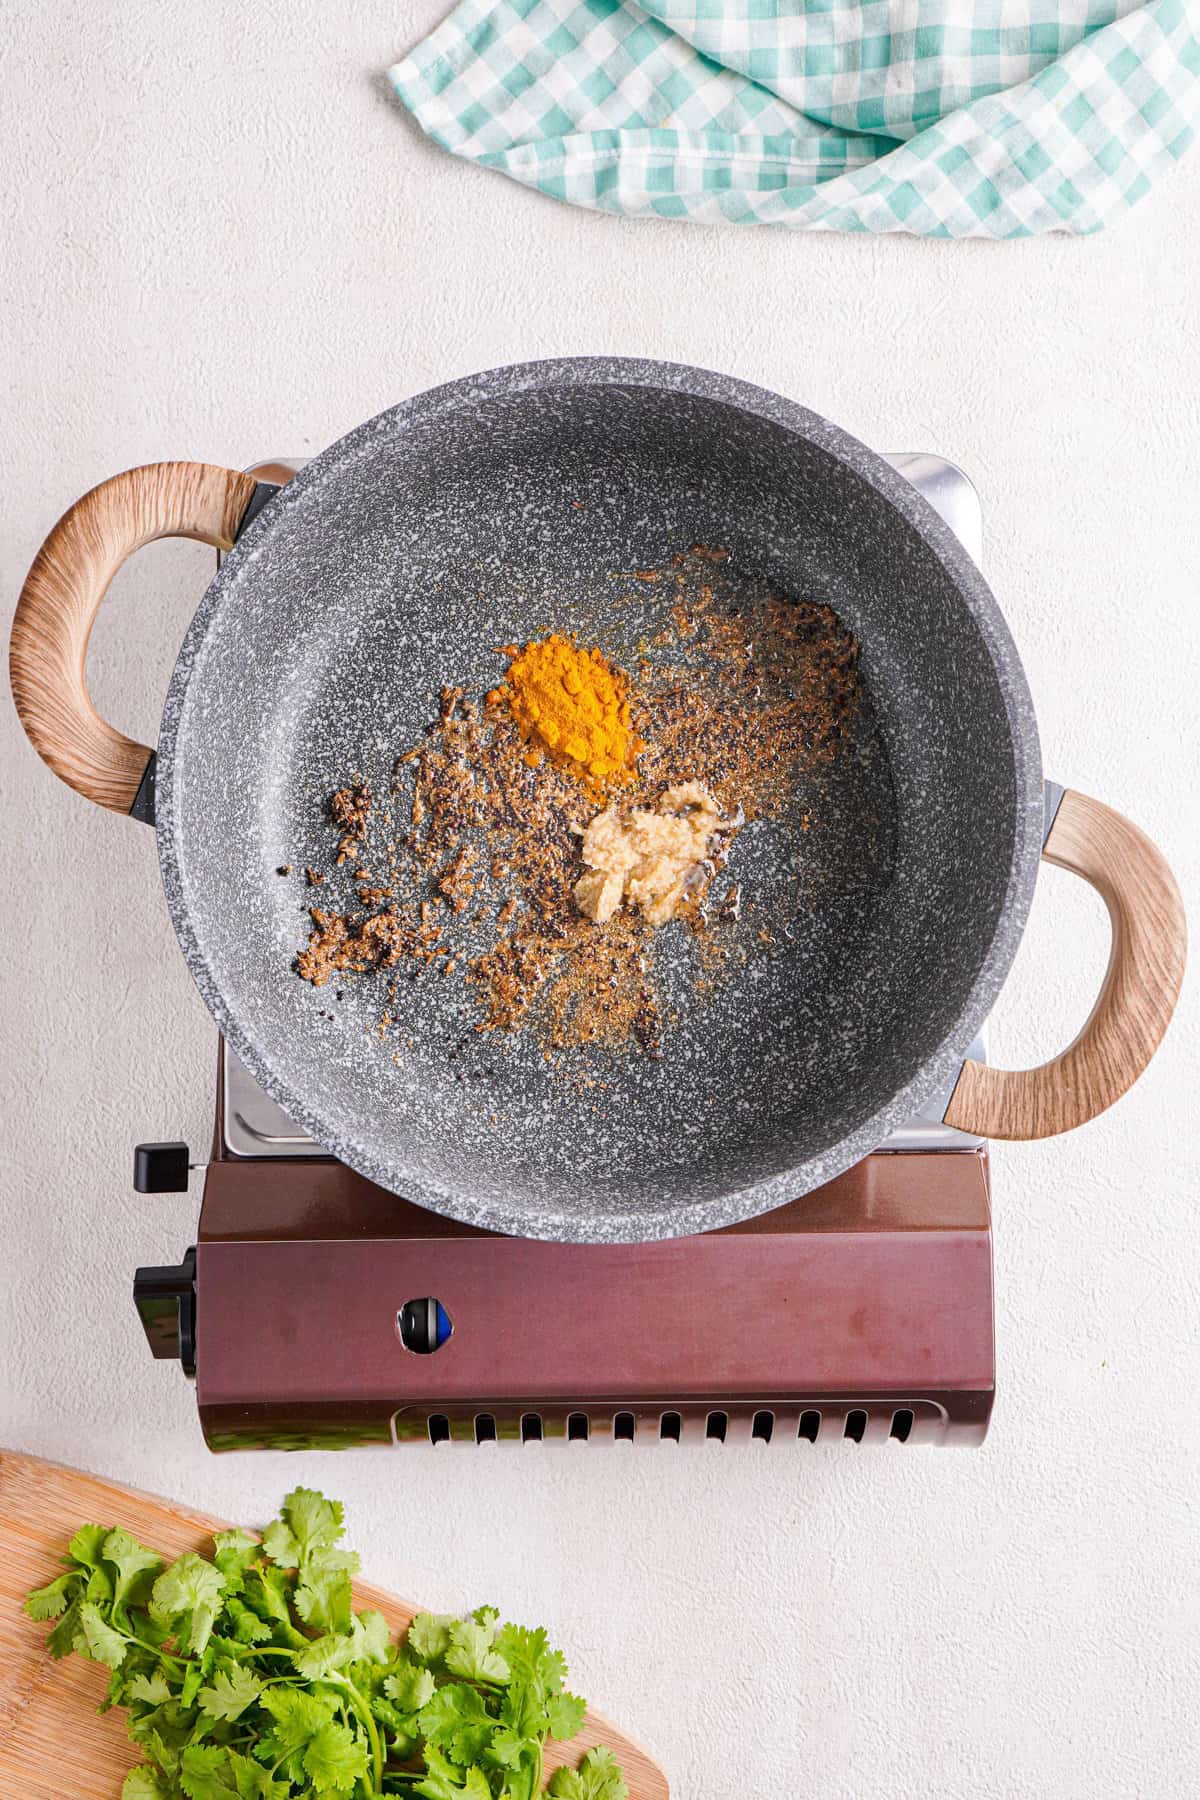 Overhead view of spices being toasted (including turmeric) in a skillet.